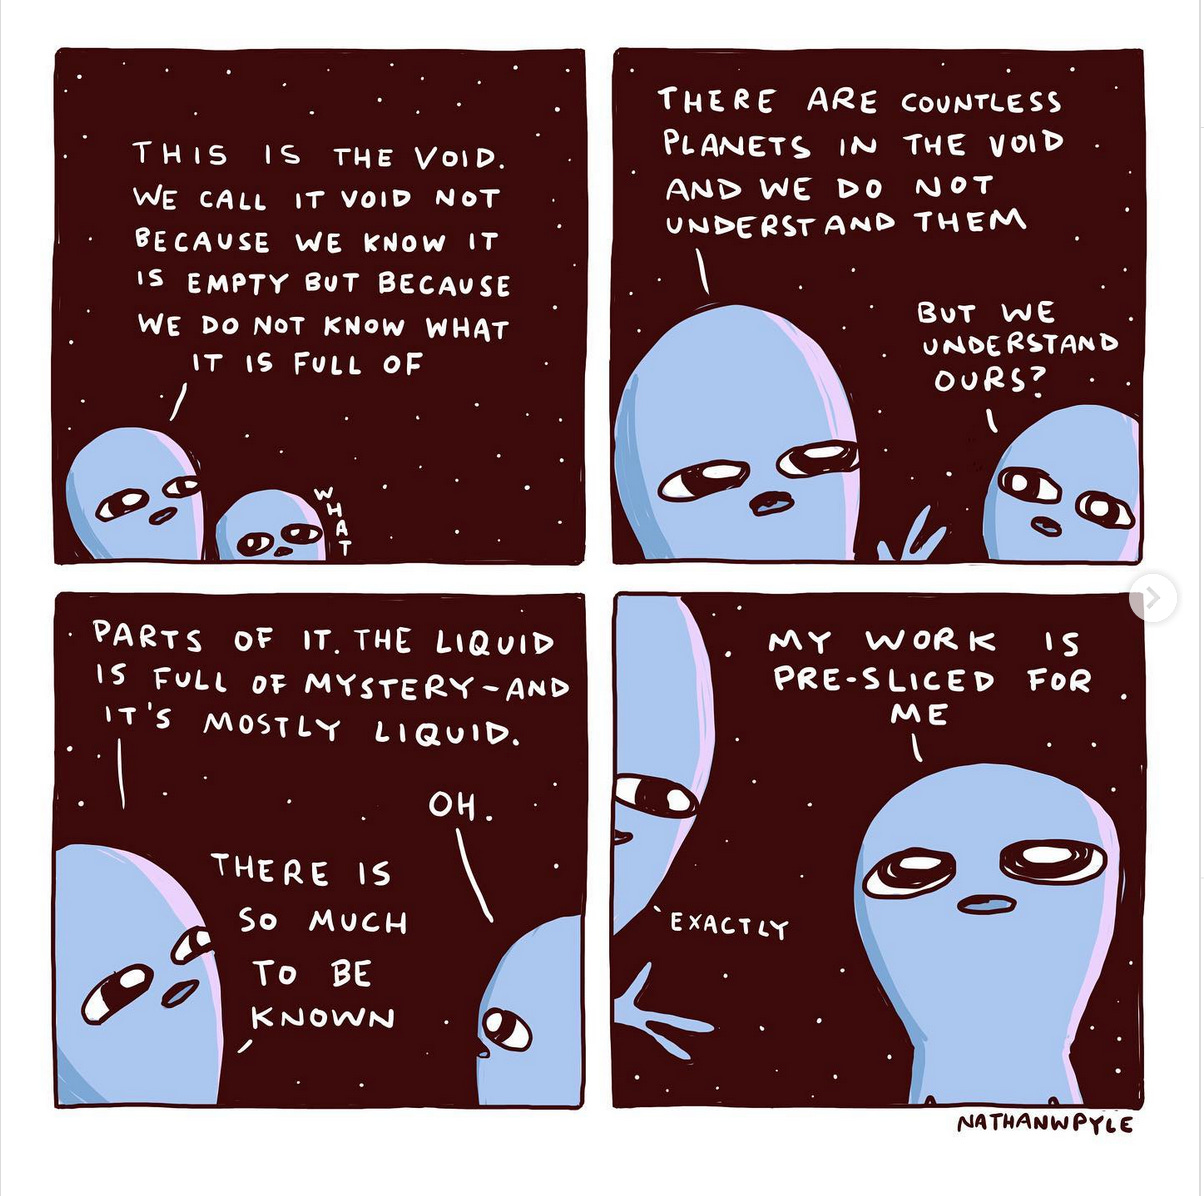 A series of four comic panels showing blue aliens against a dark night sky backdrop, looking up at the stars. "This is the void," one alien says. "We call it void not because we know it is empty but because we do not know what it is full of."